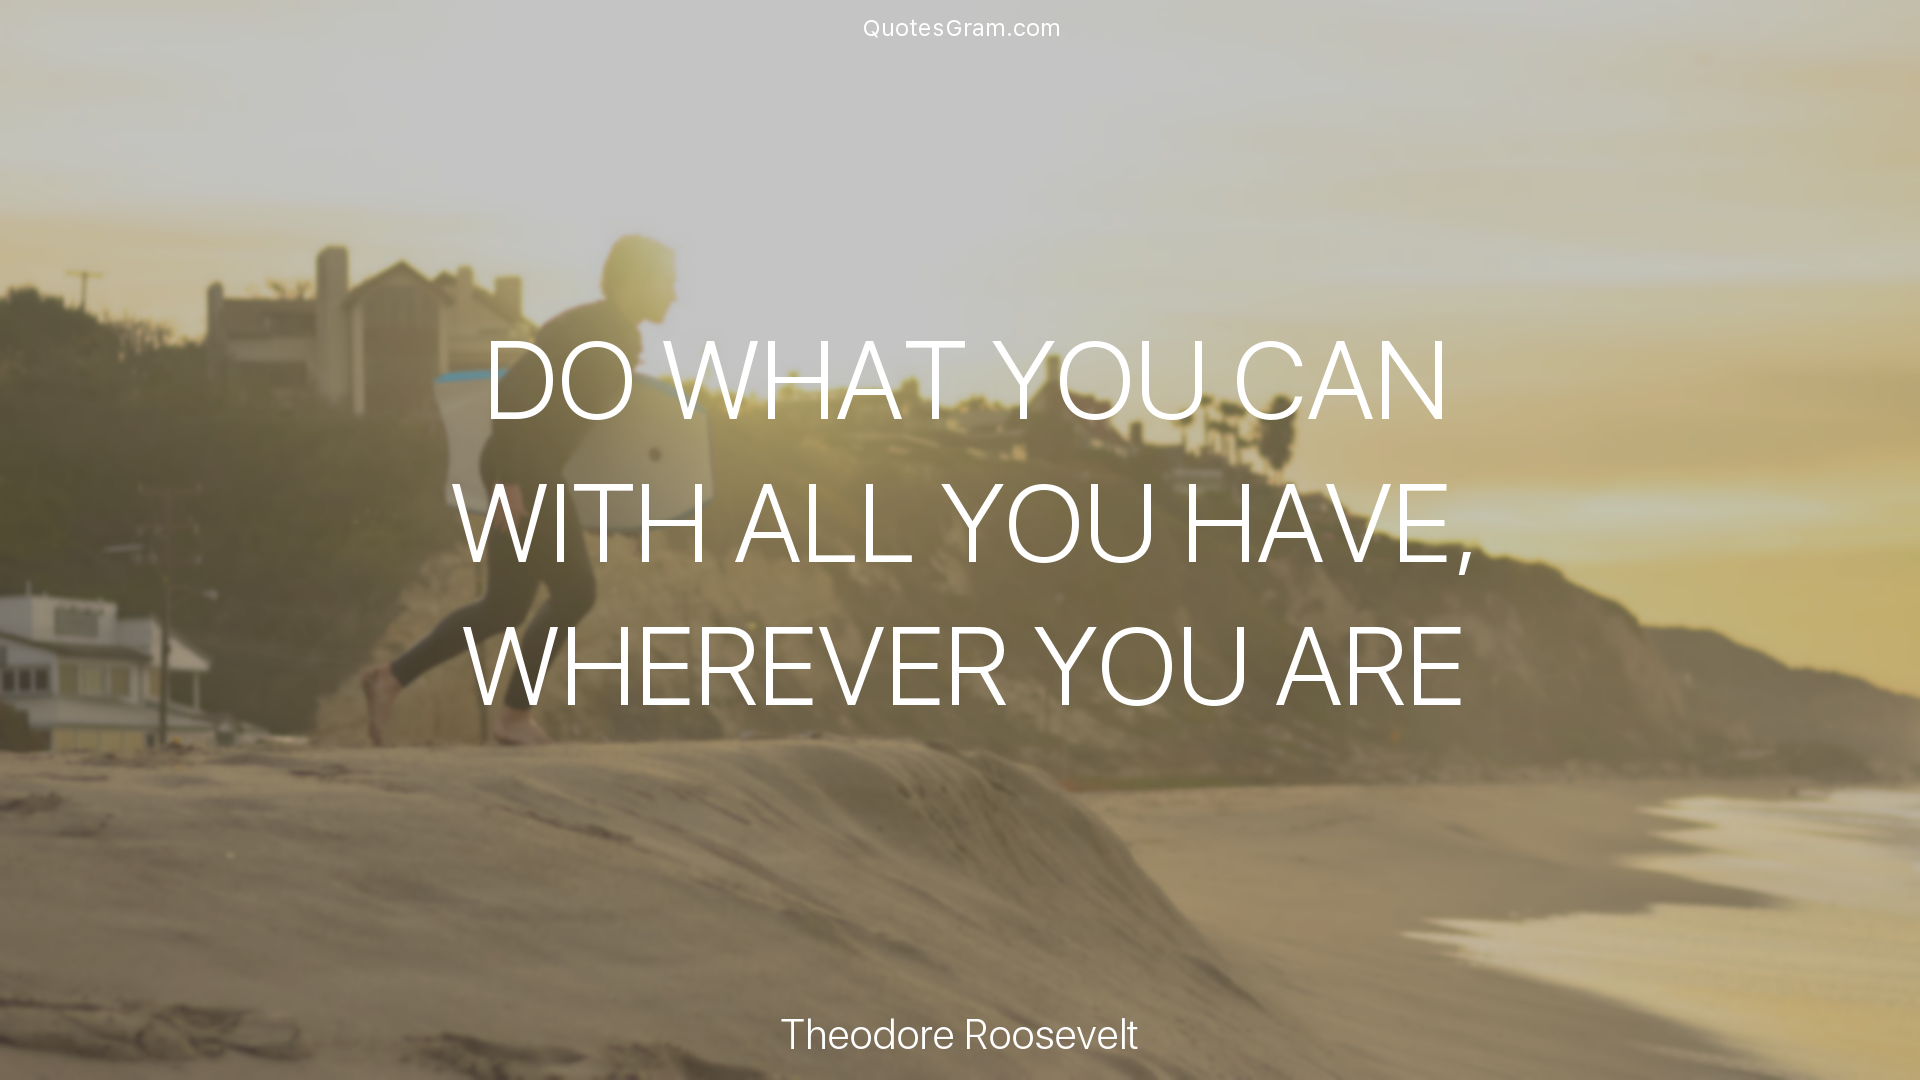 theodore-roosevelt-quote-do-what-you-can-with-all-you-have-wherever.png